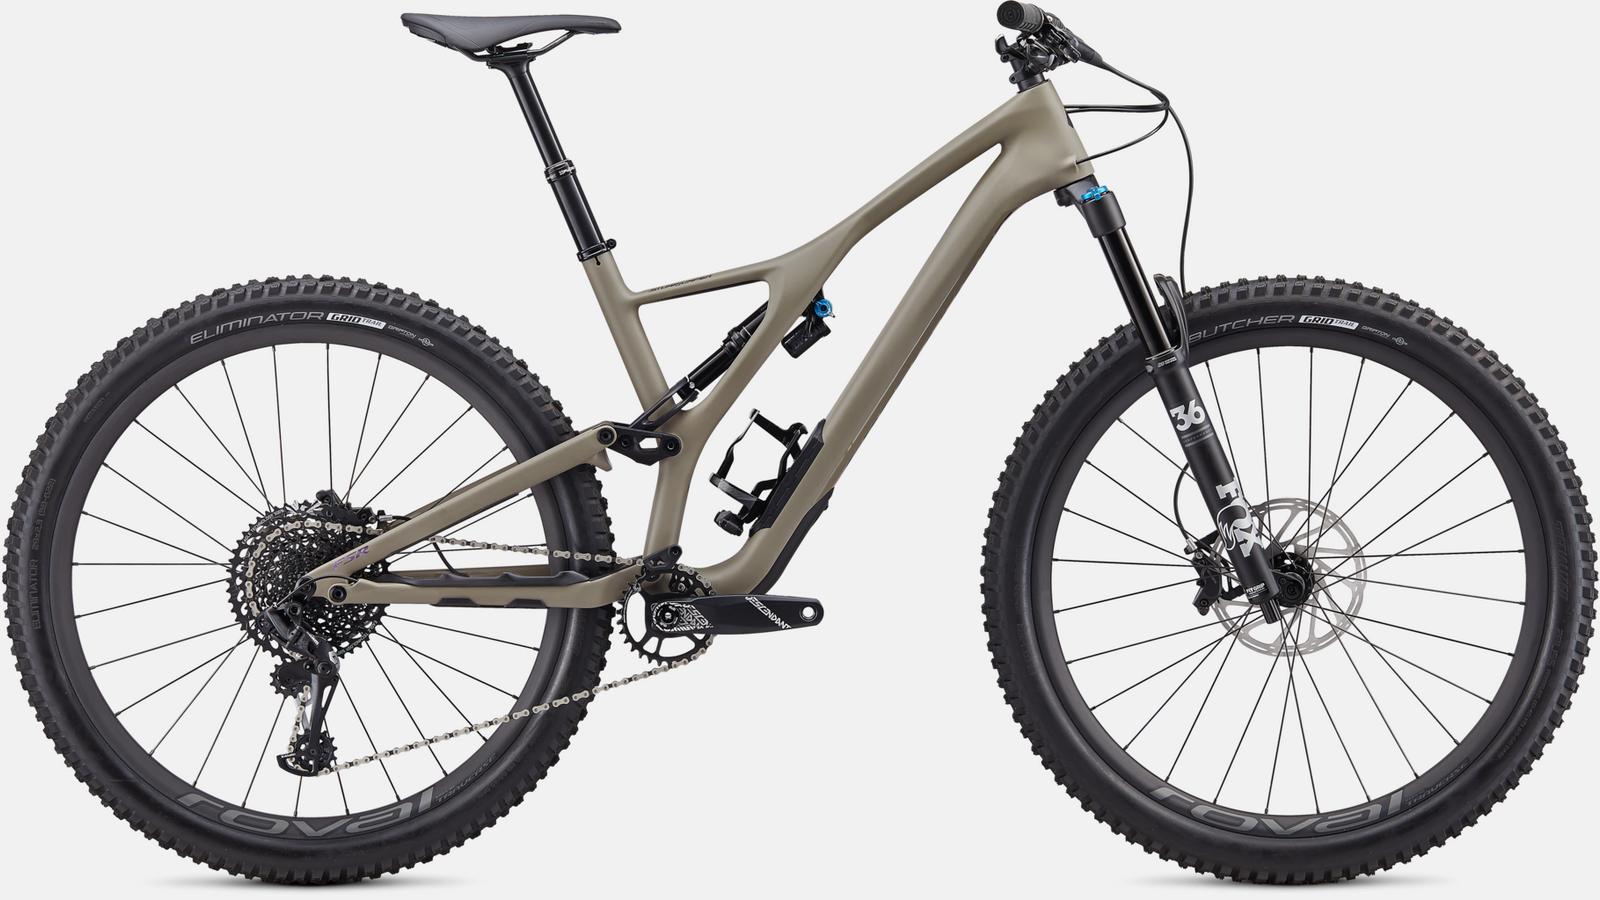 Paint for 2020 Specialized Stumpjumper Expert Carbon 29 - Satin Taupe